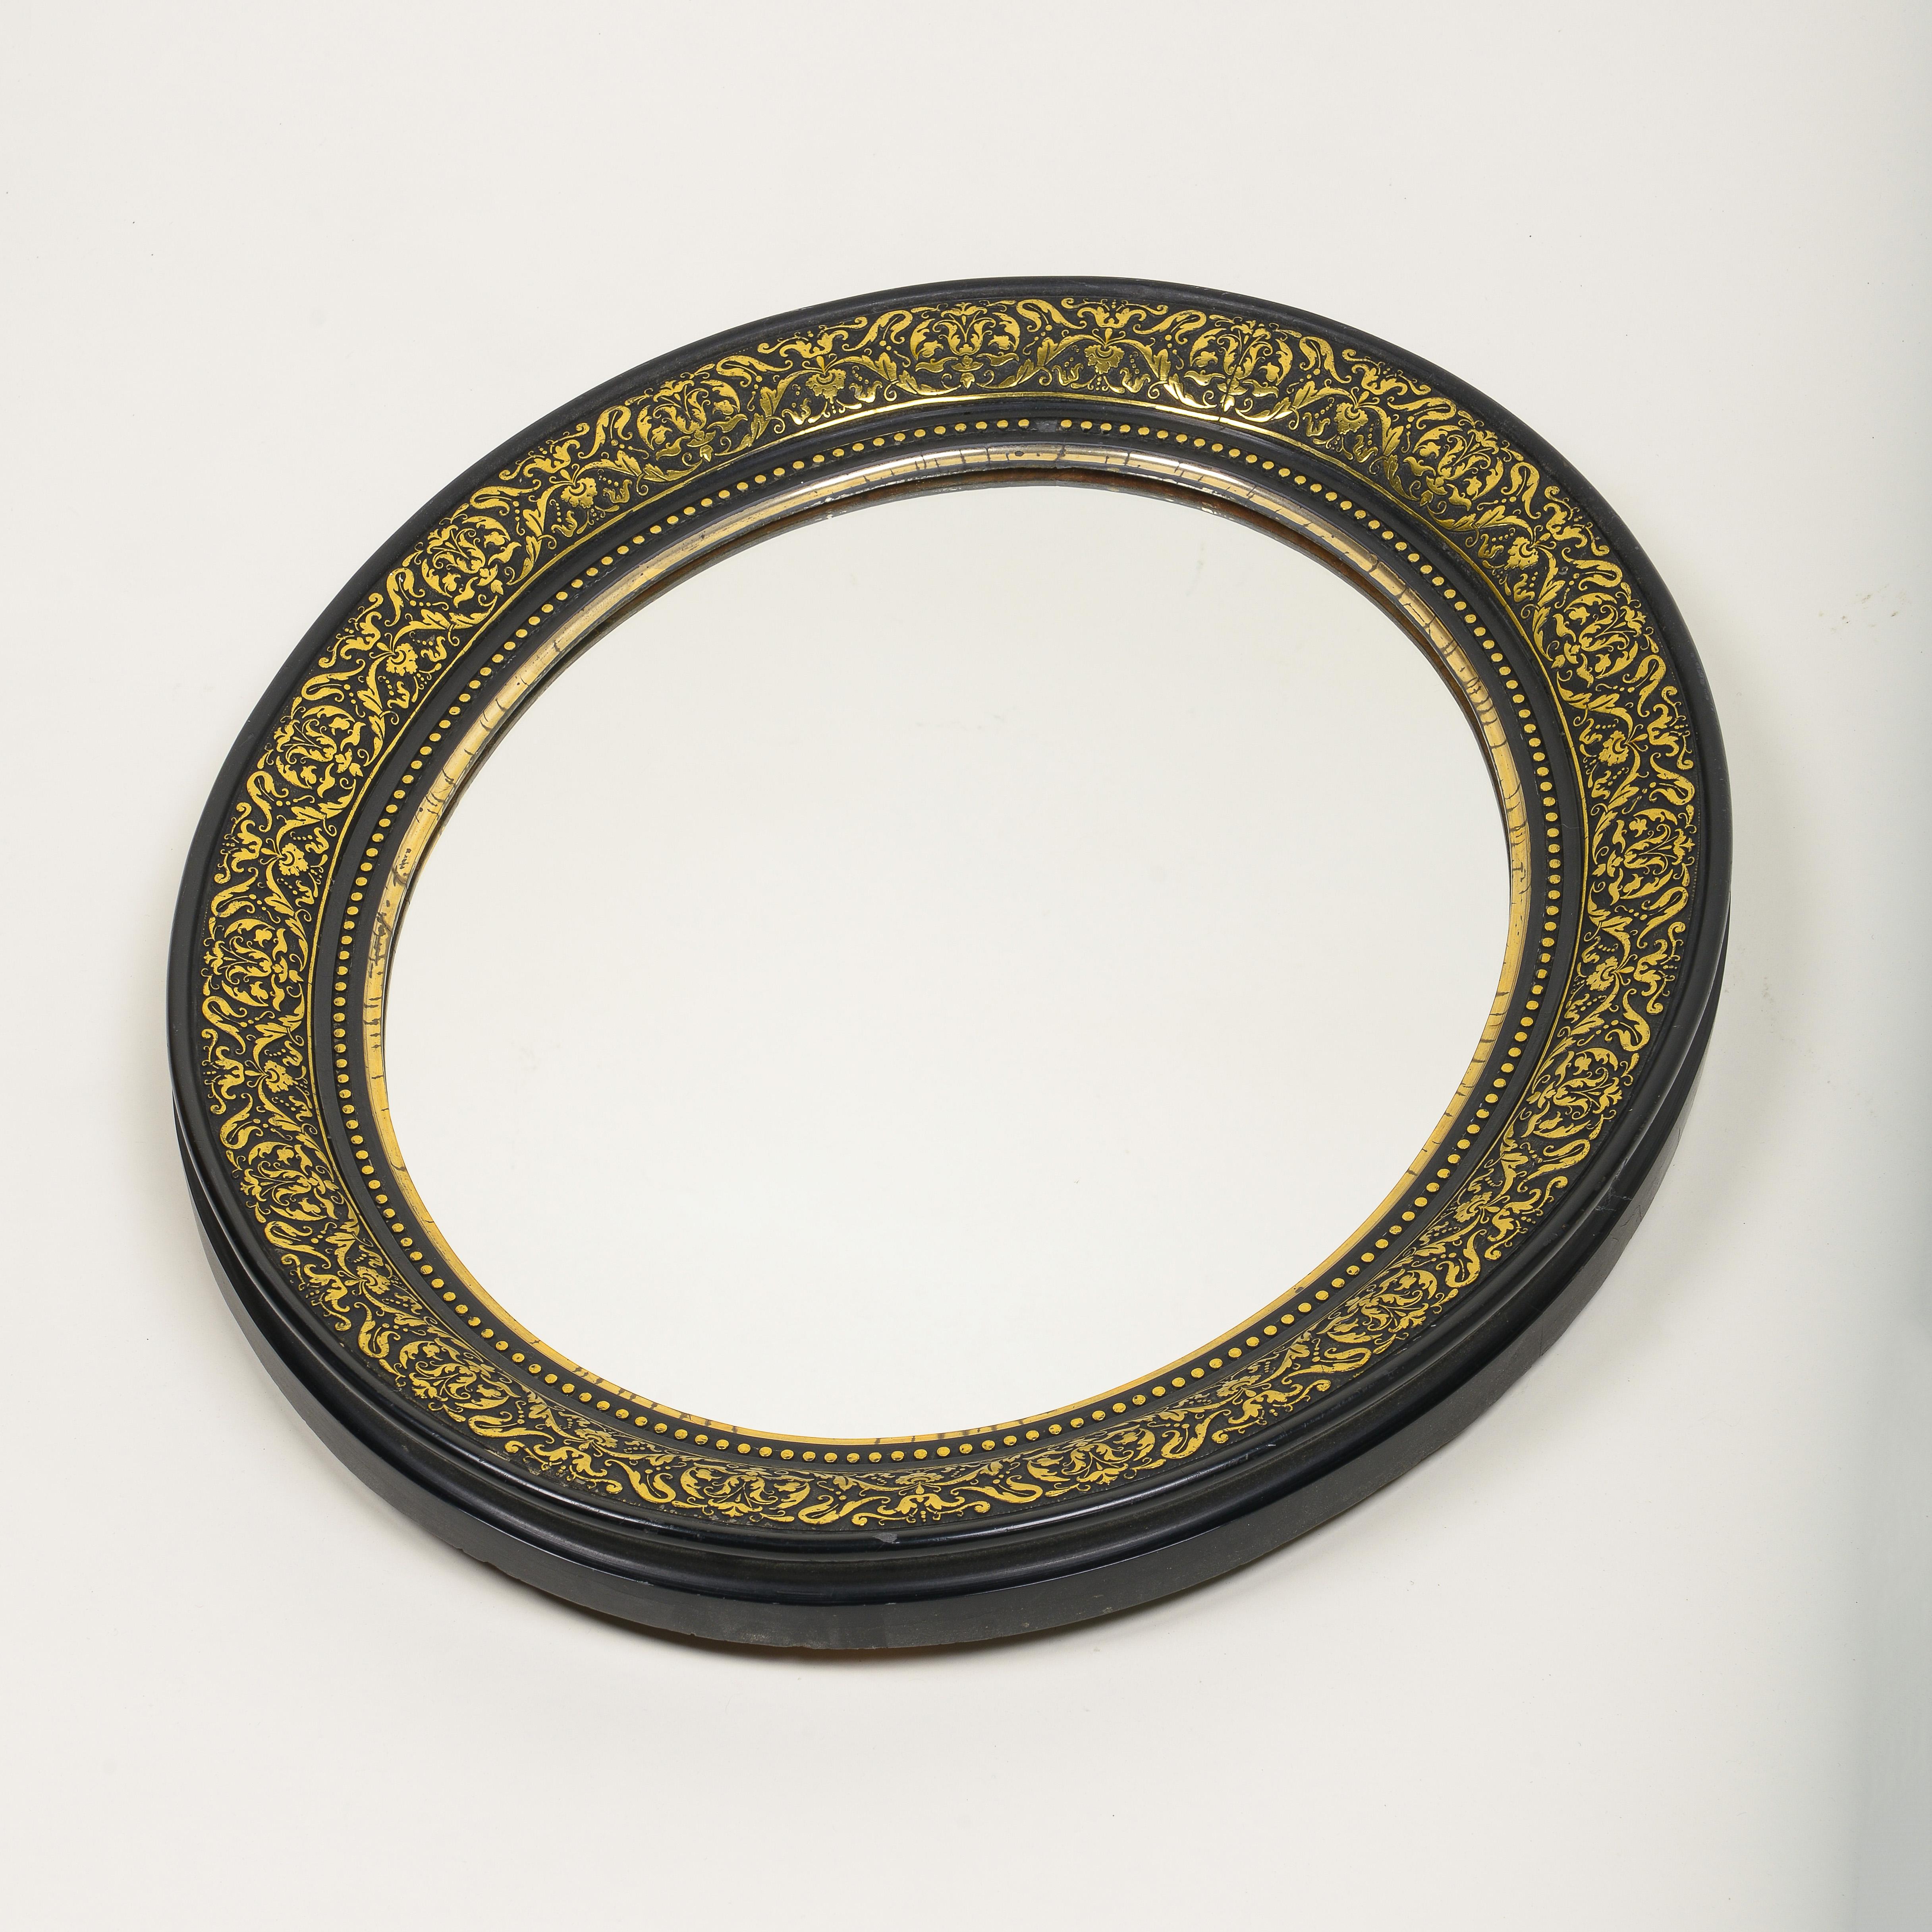 The round mirror plate within a foliate brass repousse inset ebonized wood frame, with gilt and beaded inner slips.